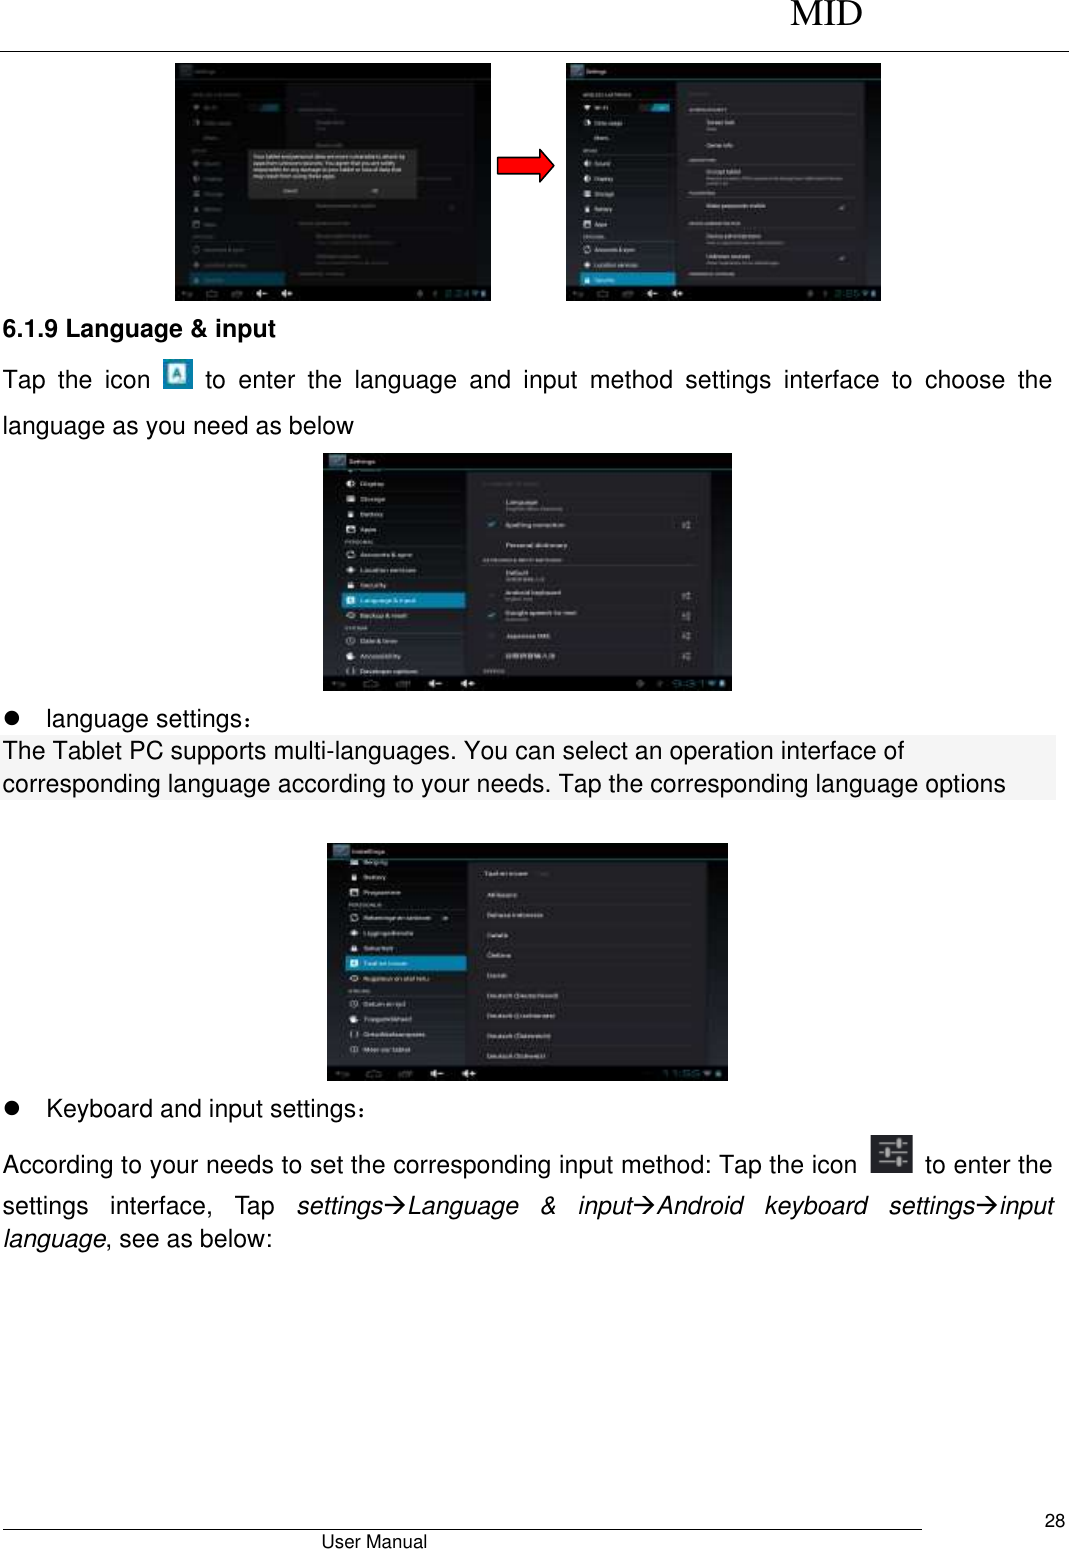      MID                                        User Manual     28                6.1.9 Language &amp; input Tap  the  icon    to  enter  the  language  and  input  method  settings  interface  to  choose  the language as you need as below    language settings： The Tablet PC supports multi-languages. You can select an operation interface of corresponding language according to your needs. Tap the corresponding language options       Keyboard and input settings： According to your needs to set the corresponding input method: Tap the icon    to enter the settings  interface,  Tap  settingsLanguage  &amp;  inputAndroid  keyboard  settingsinput language, see as below: 